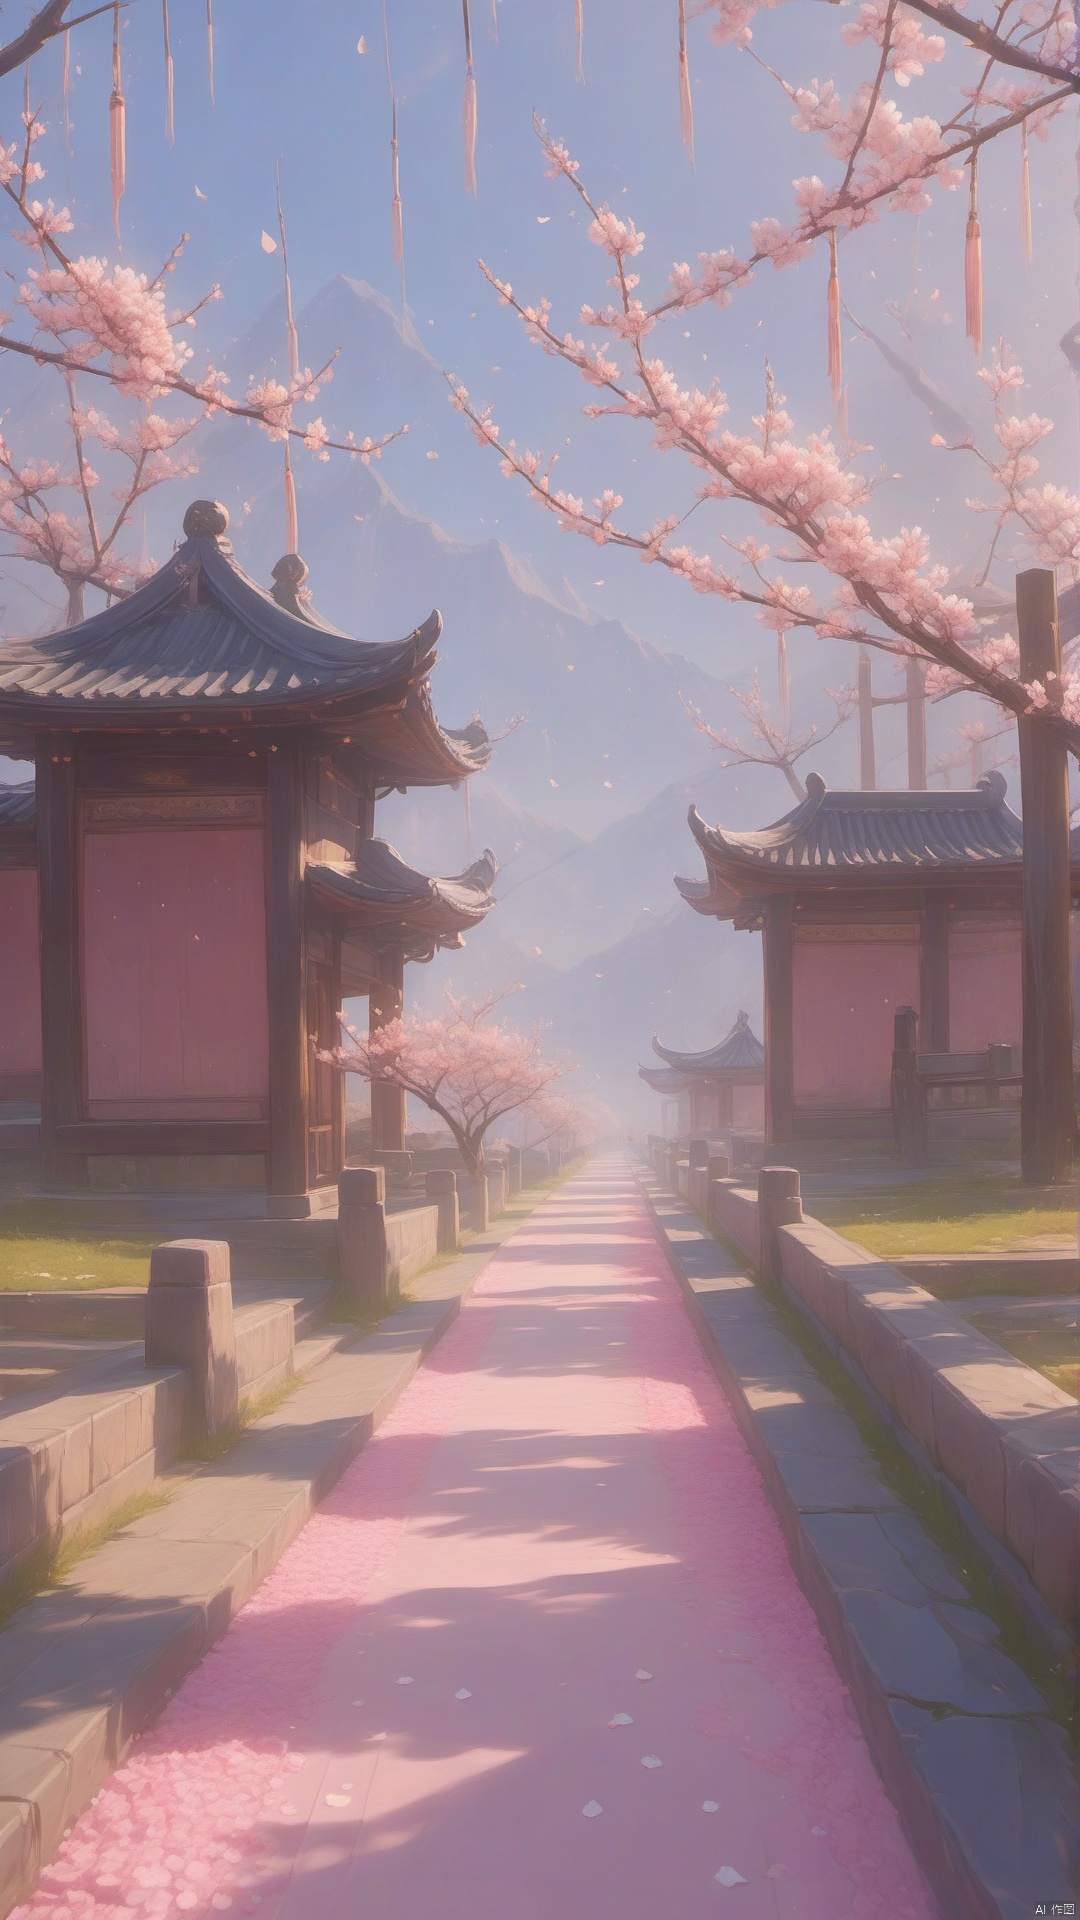  A deserted path, with a plethora of blooming peach blossoms and pink petals on the ground,no humans